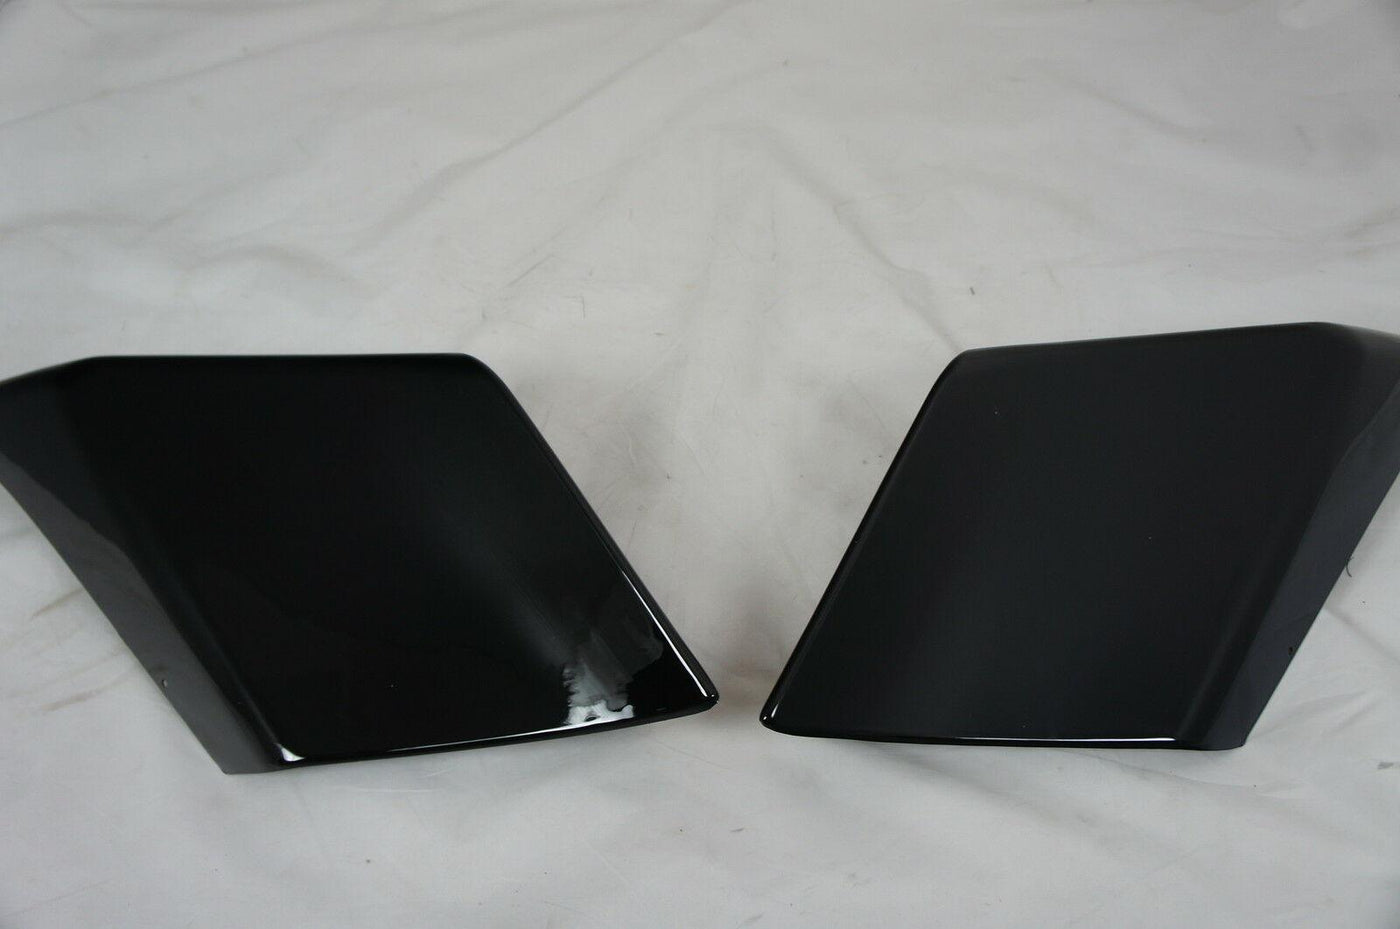 Mutazu Custom Black Extended Stretched Side Covers For Harley Touring Models - Moto Life Products